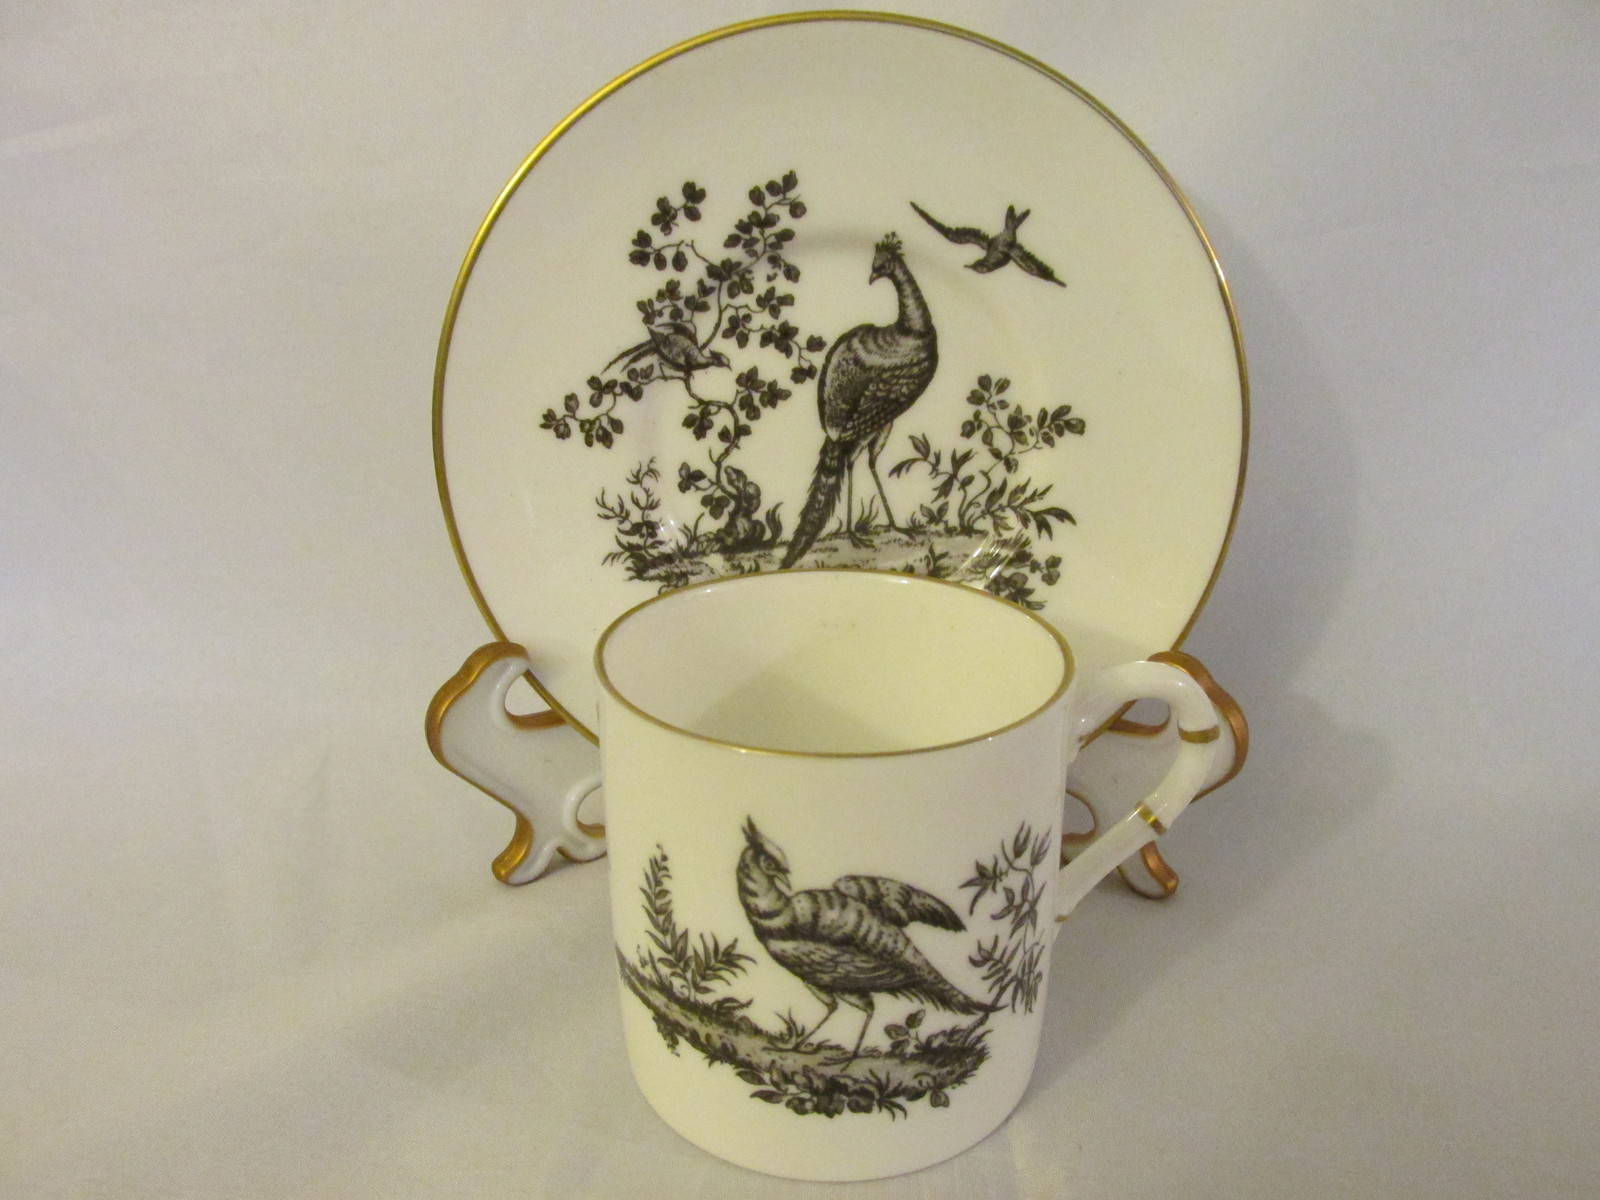 Primary image for Royal Worcester English Bone China Demitasse Cup & Saucer, "Pheasant" - 1950s